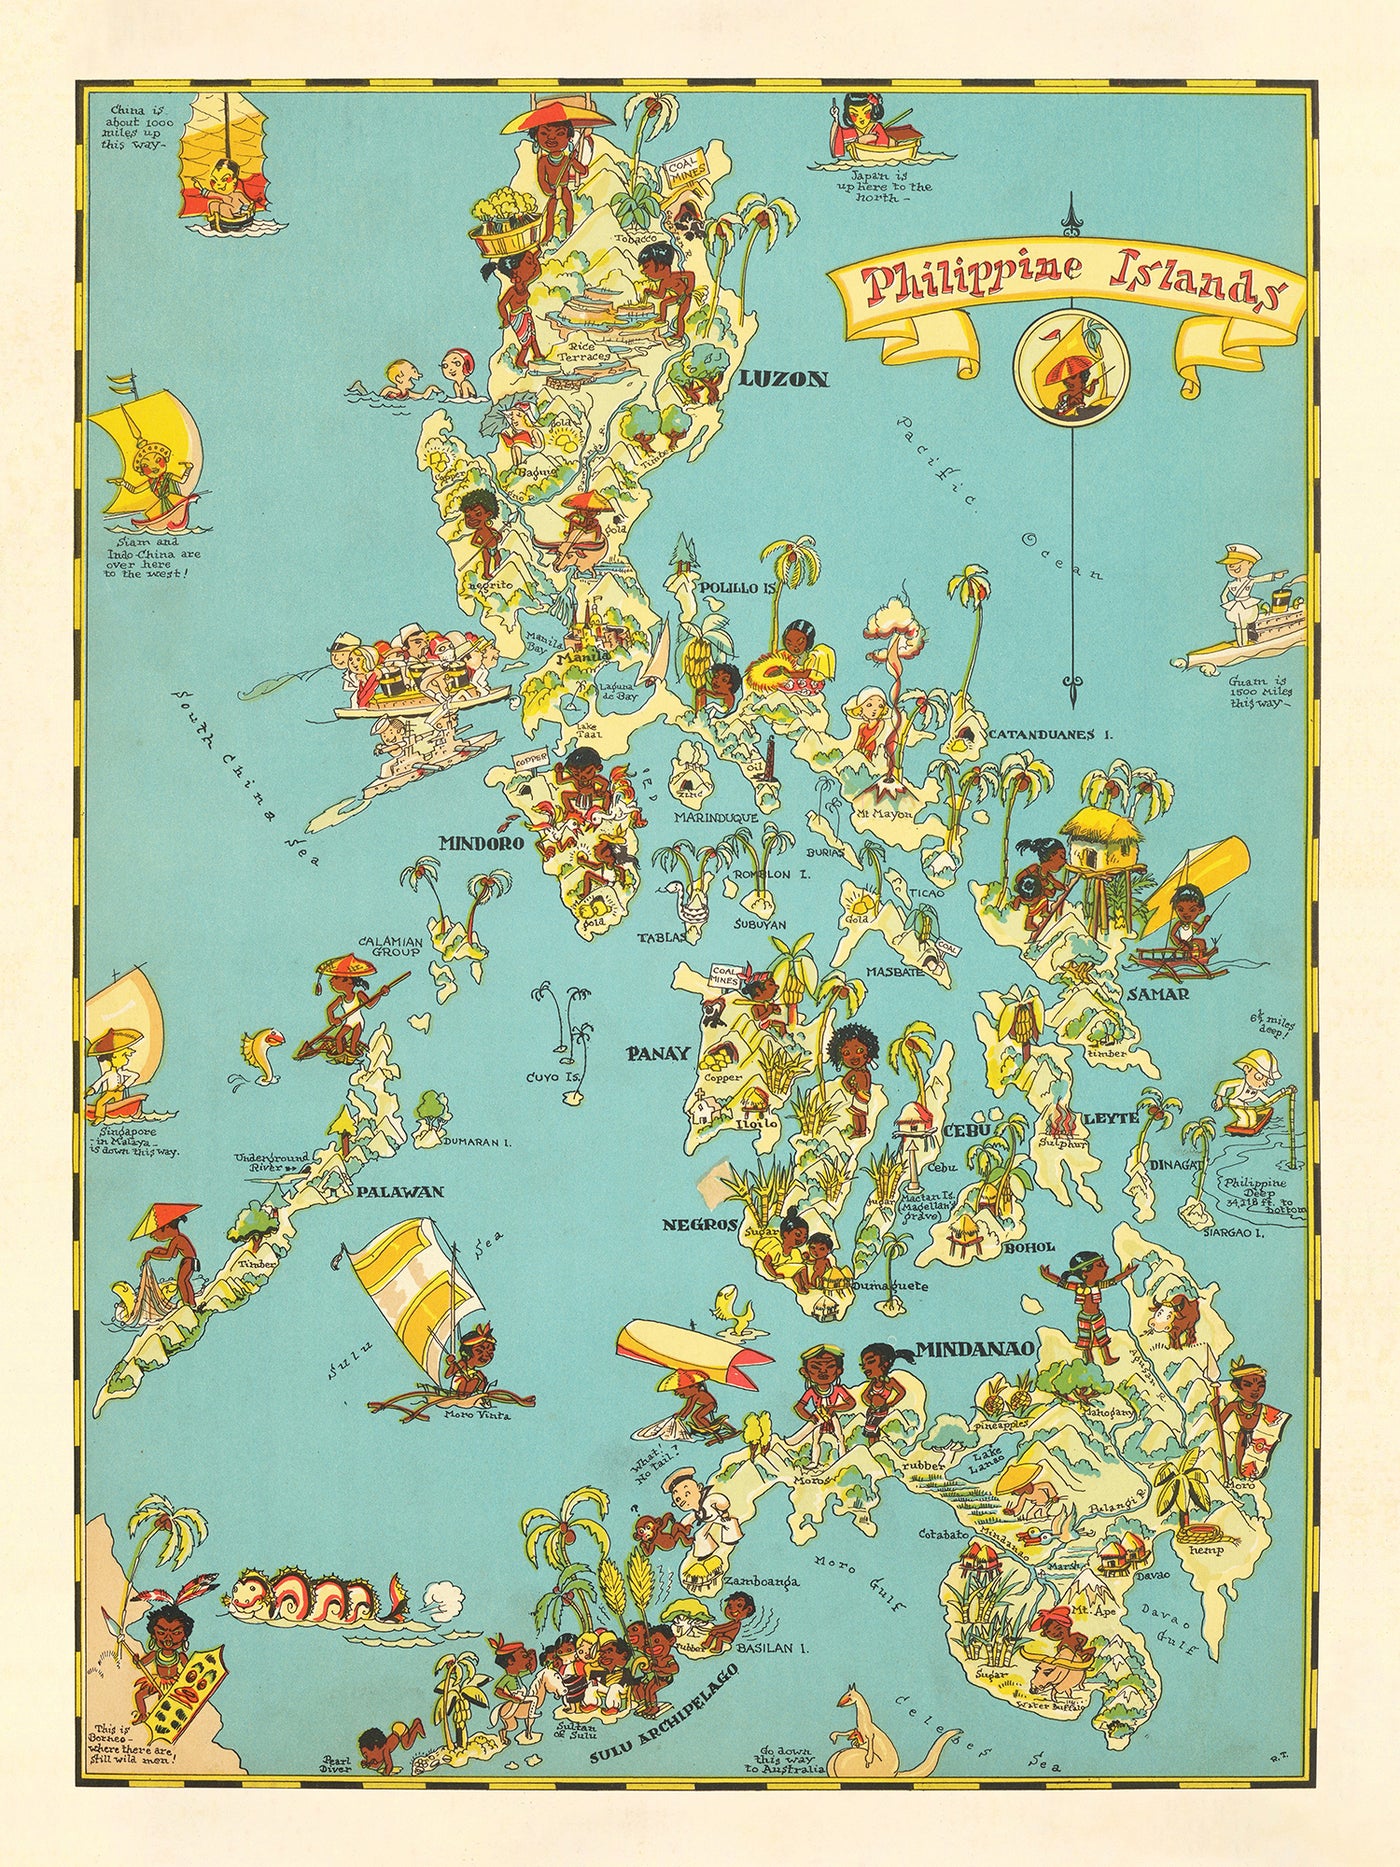 Old Map of the Philippines by Ruth Taylor White, 1935: Manila, Luzon, Samar, Mindanao, and the Sulu Archipelago